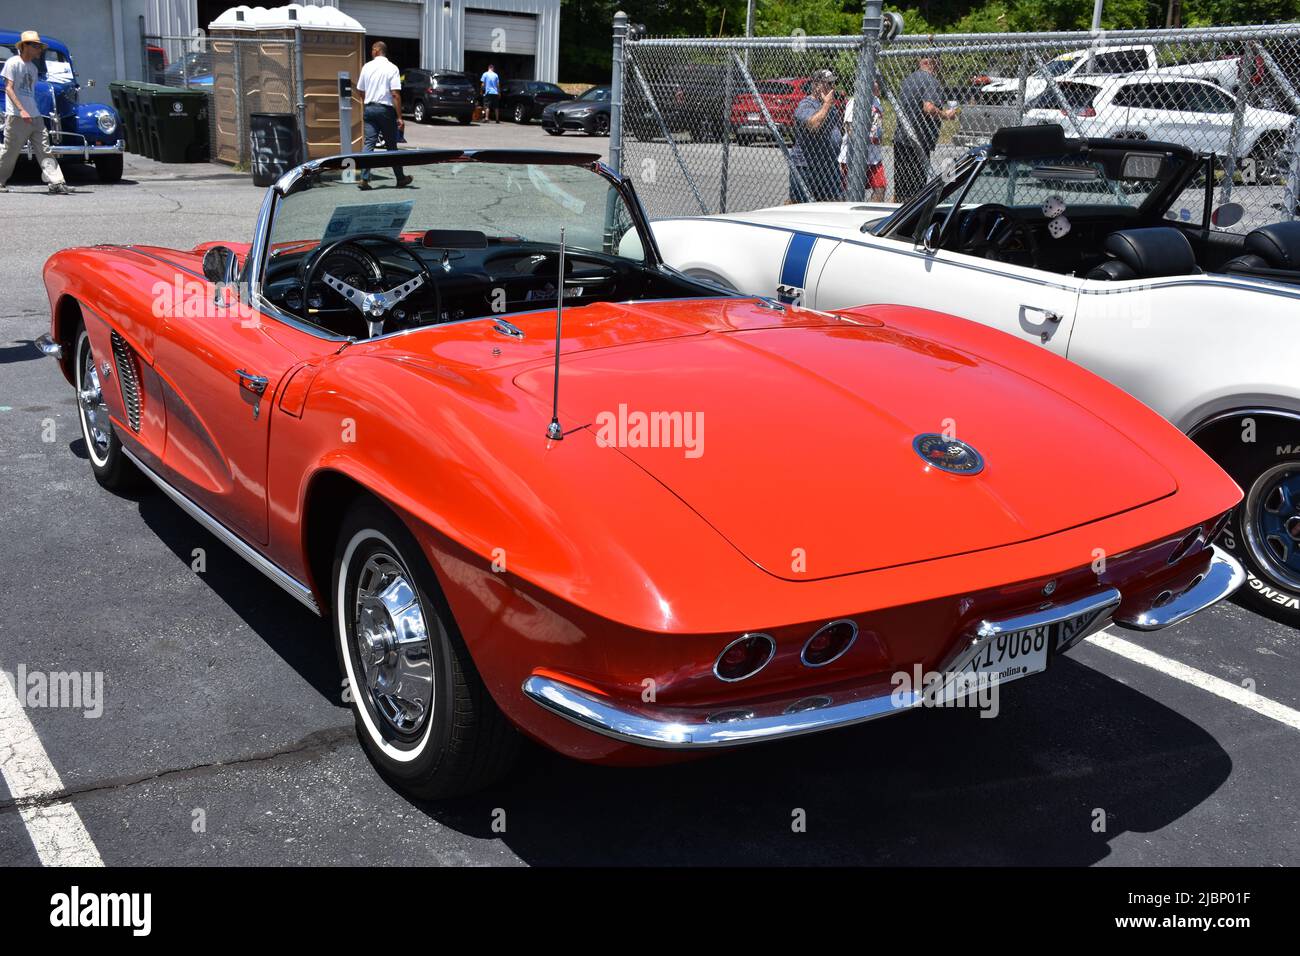 A Red 1962 Chevrolet Corvette on display at a car show. Stock Photo